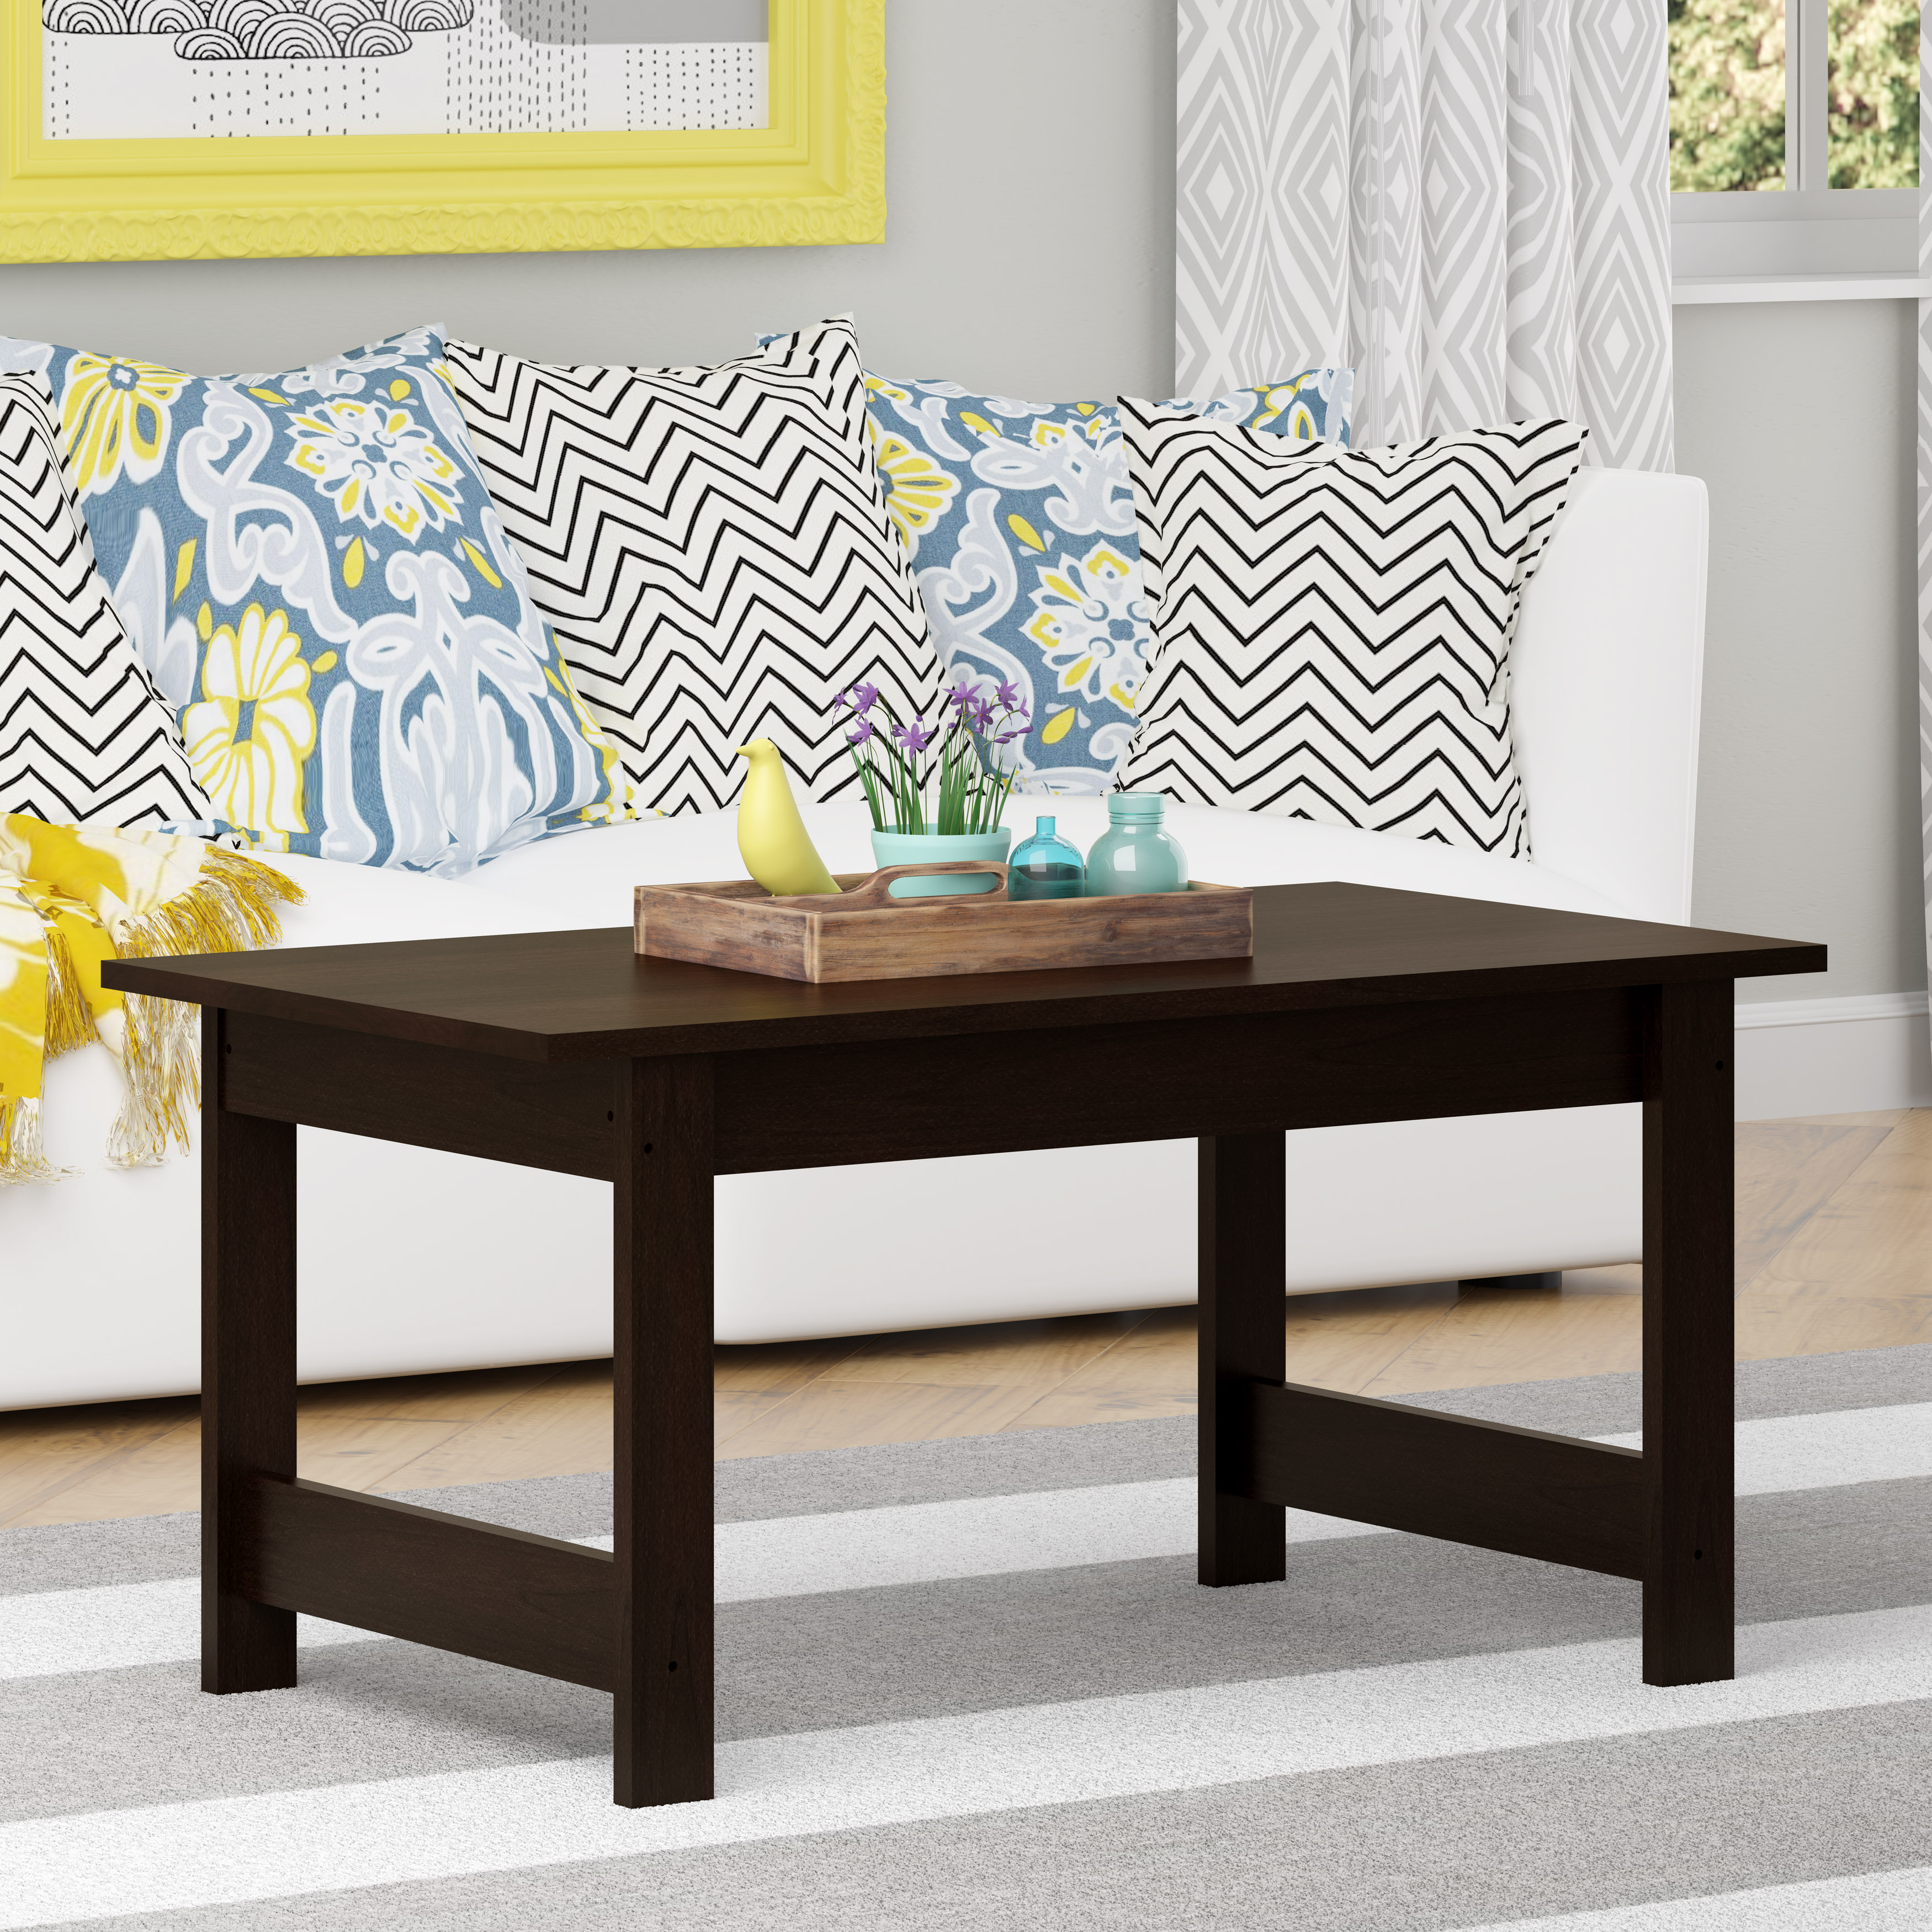 good coffee table cherry prod kmart furniture end tables joanna line pier reviews when does the calendar start reclining deck chair wooden dog crates stackable patio side inch